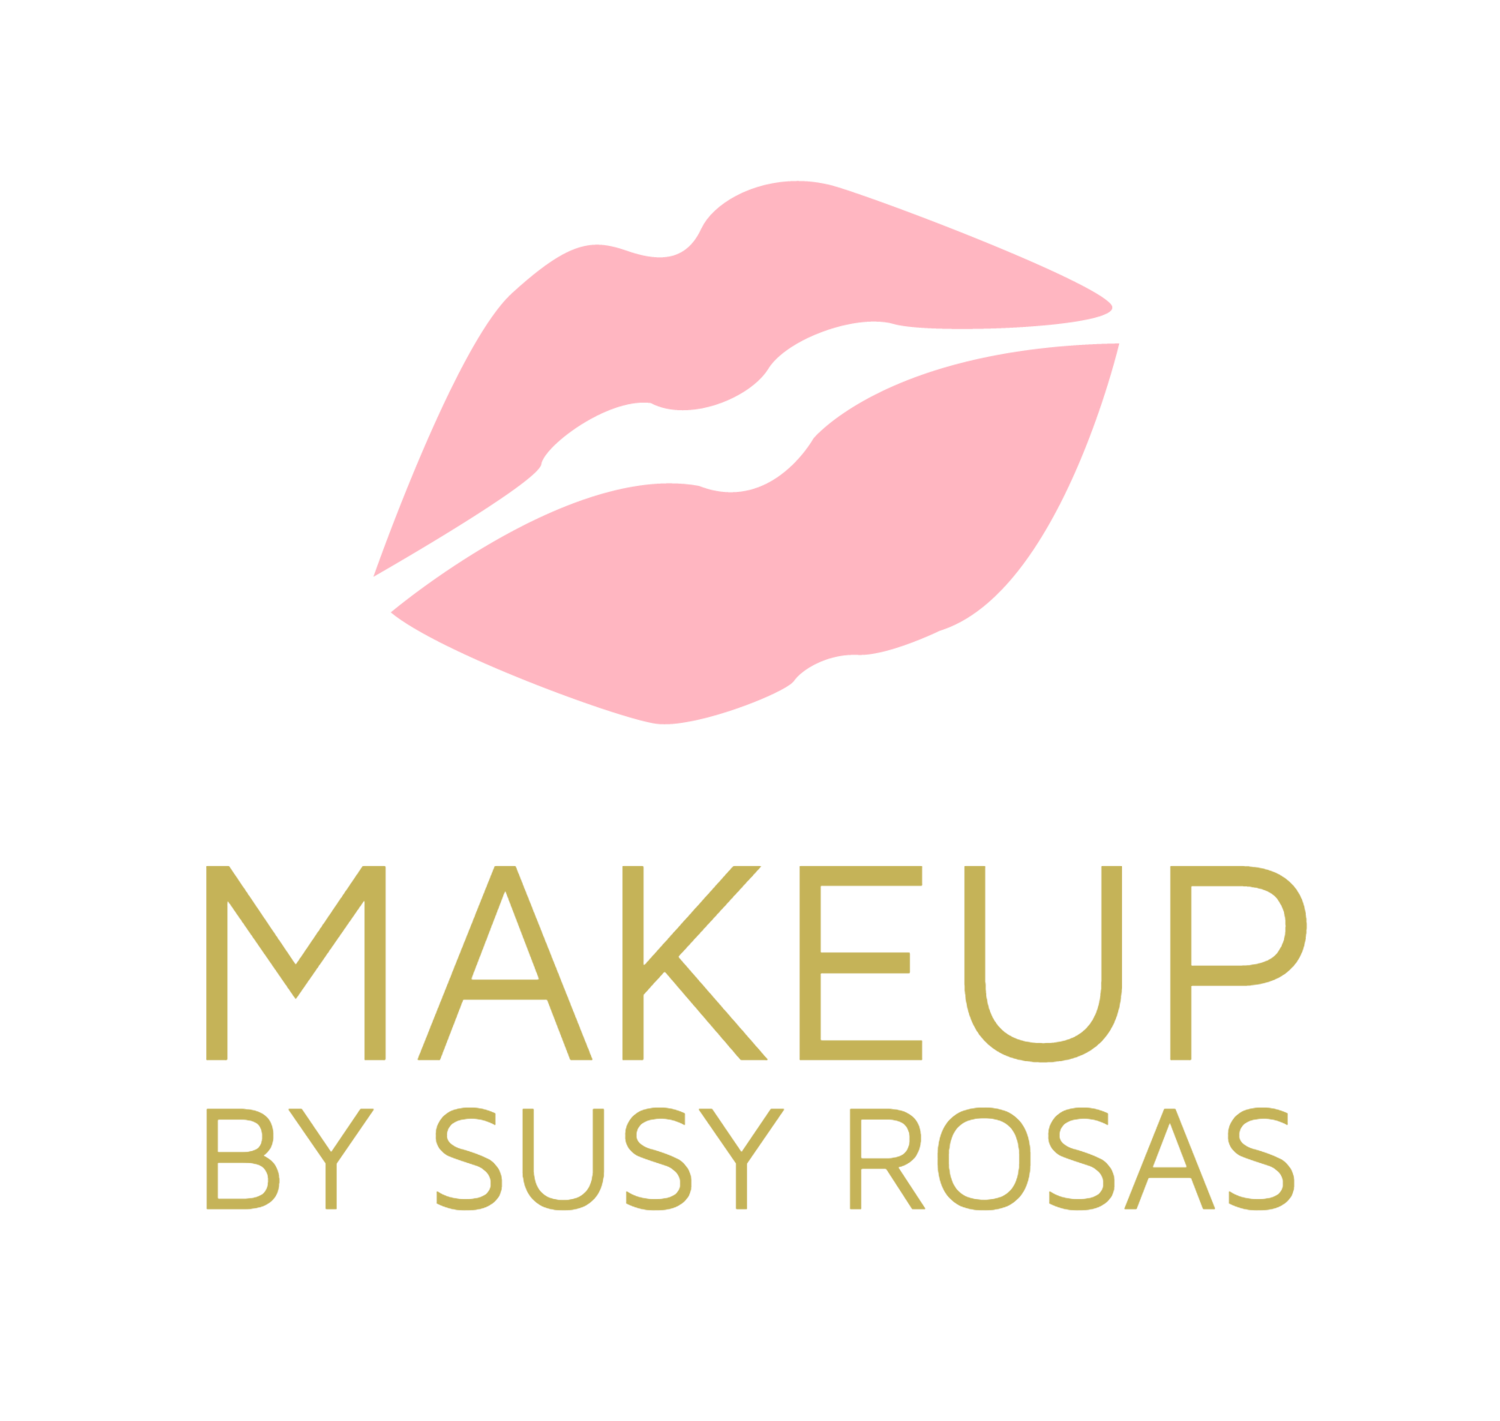 Makeup by Susy Rosas